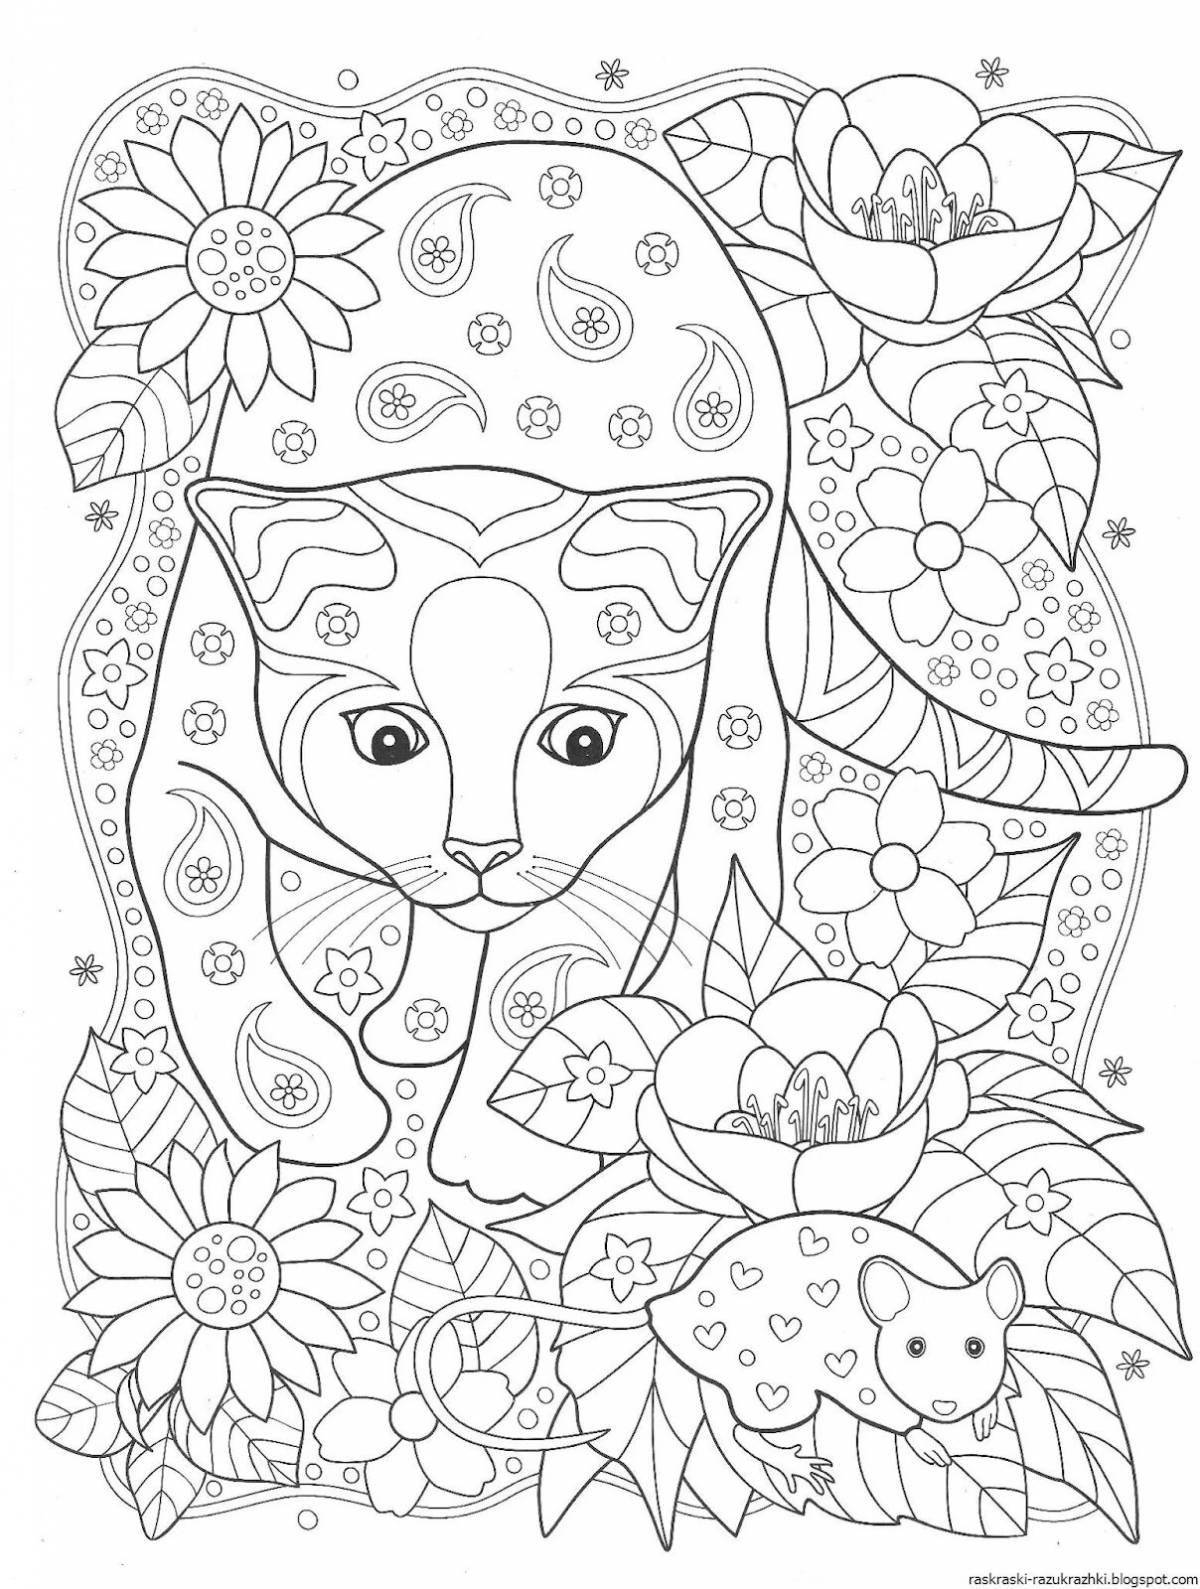 Inviting anti-stress coloring book for girls 8 years old